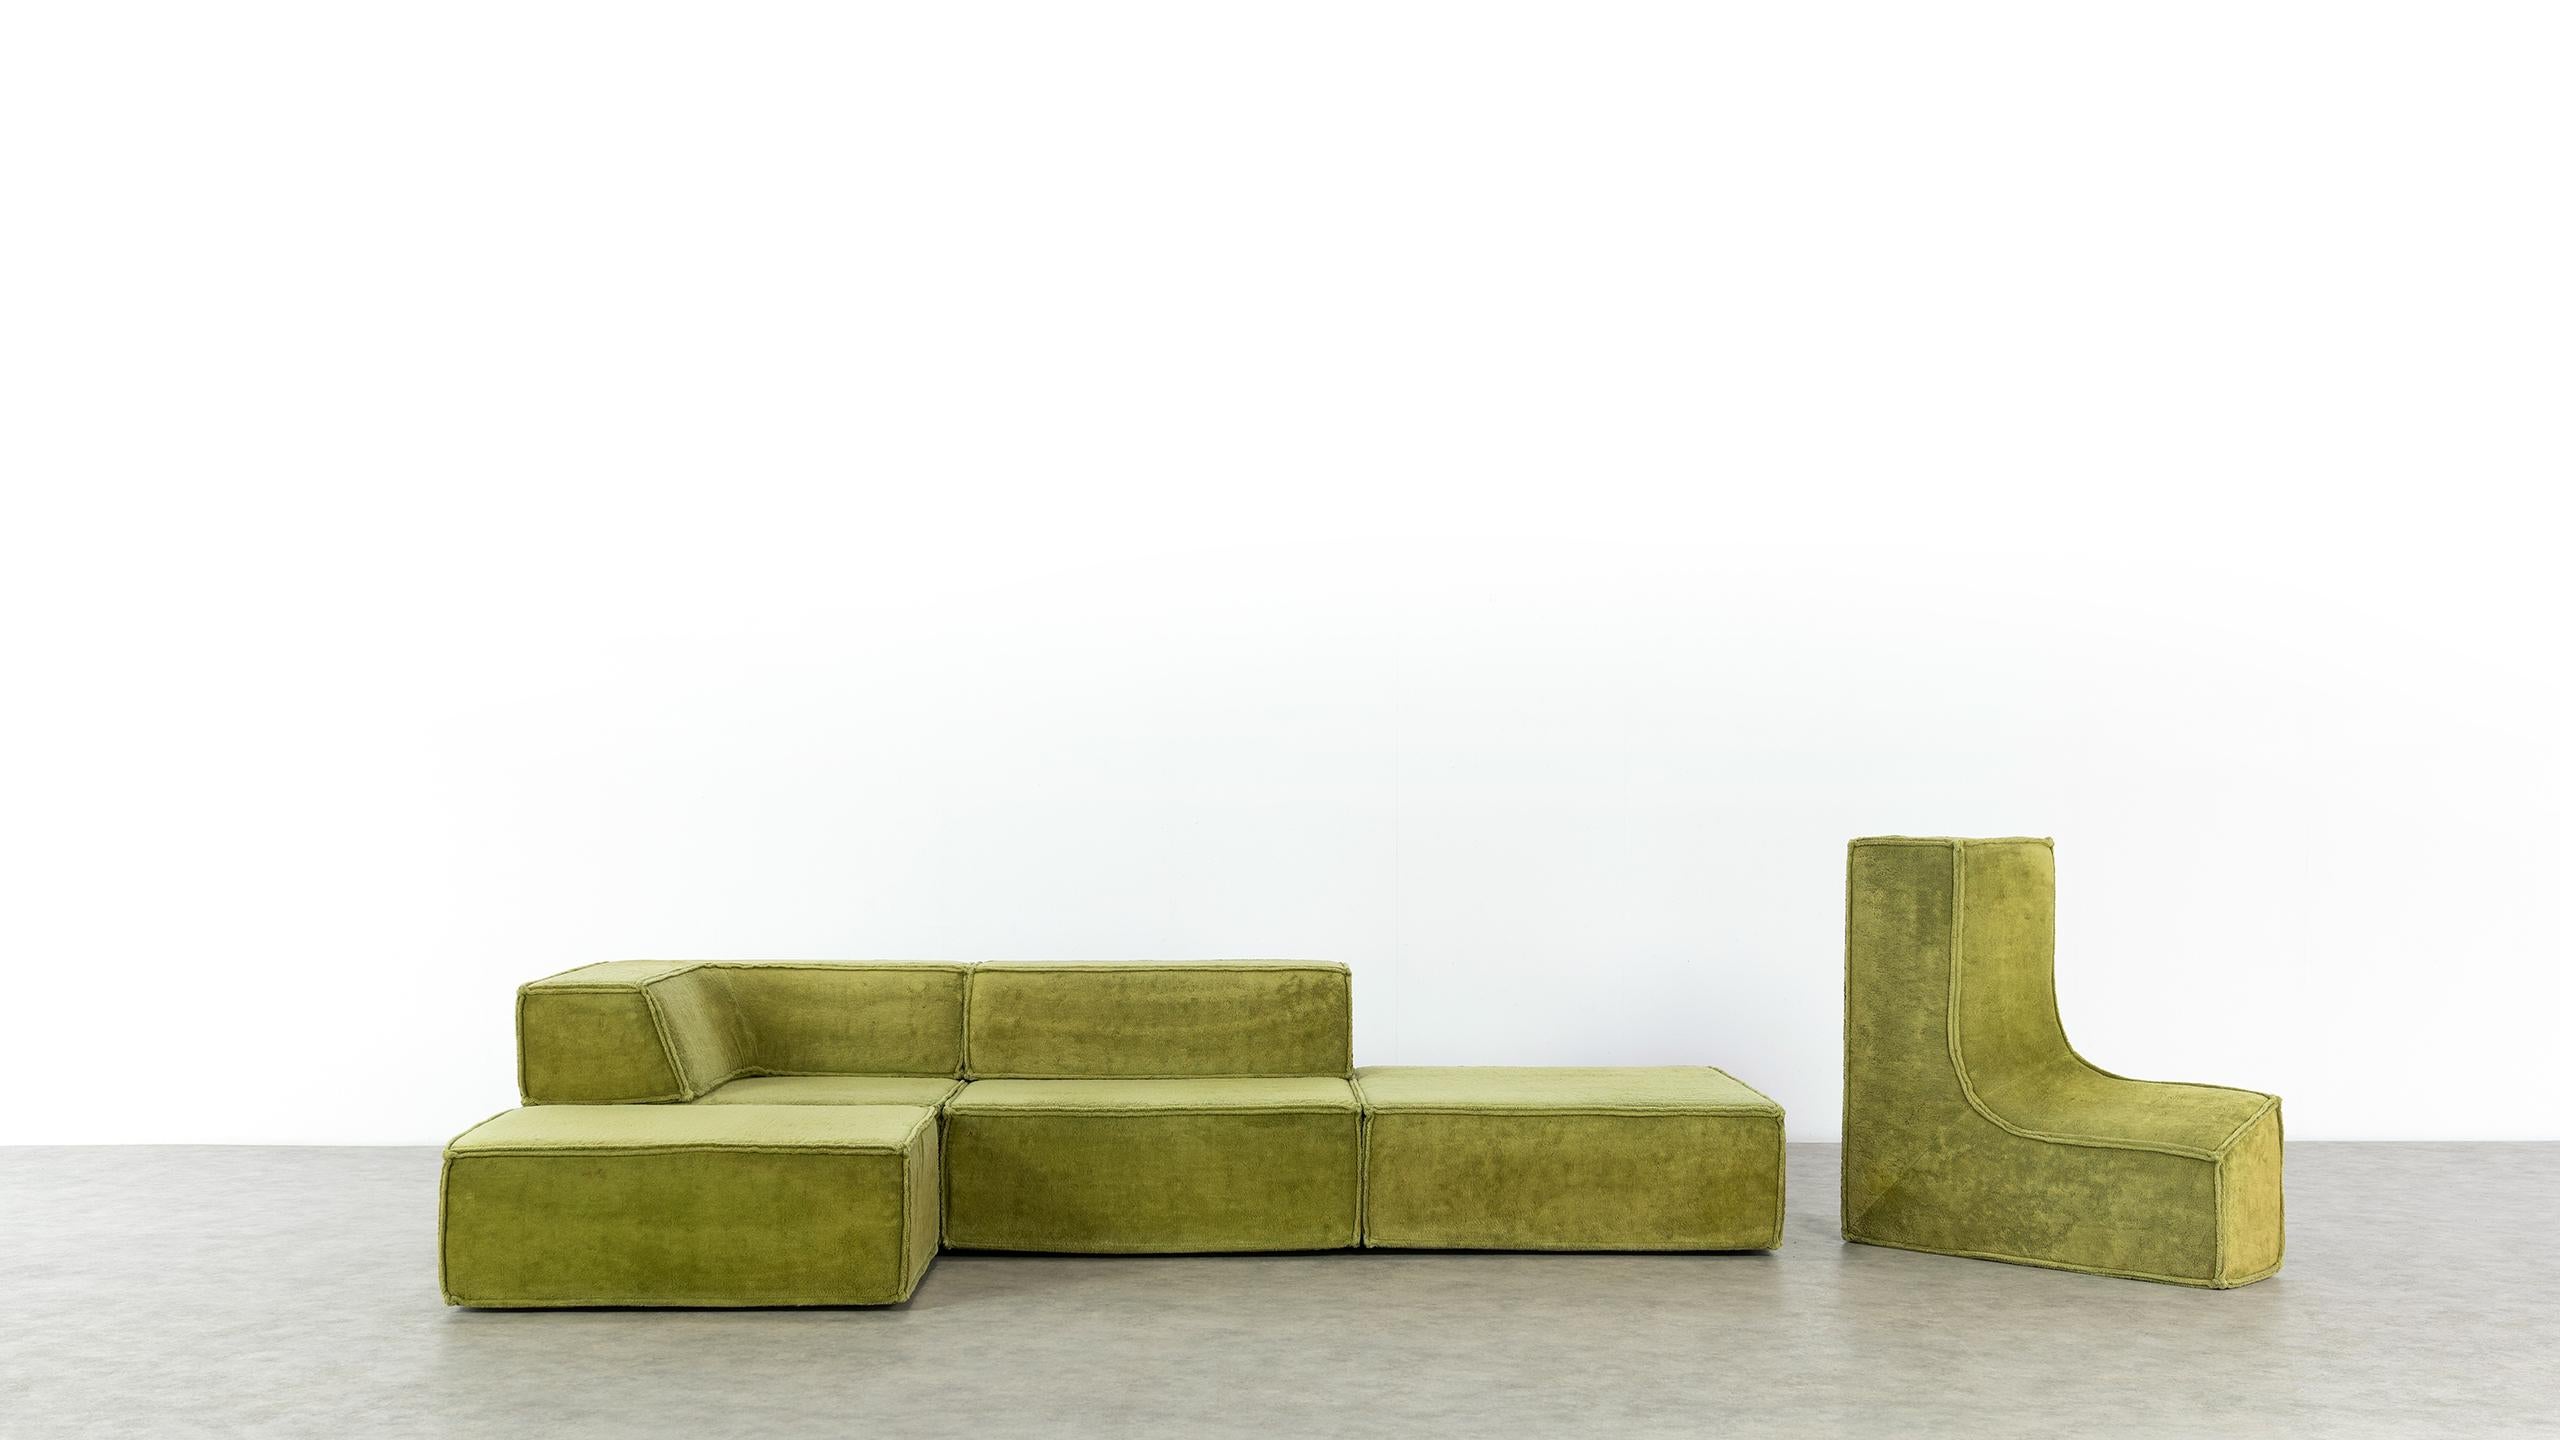 Late 20th Century COR Trio Modular Sofa, Giant Landscape in Green, 1972 by Team Form Ag, Swiss